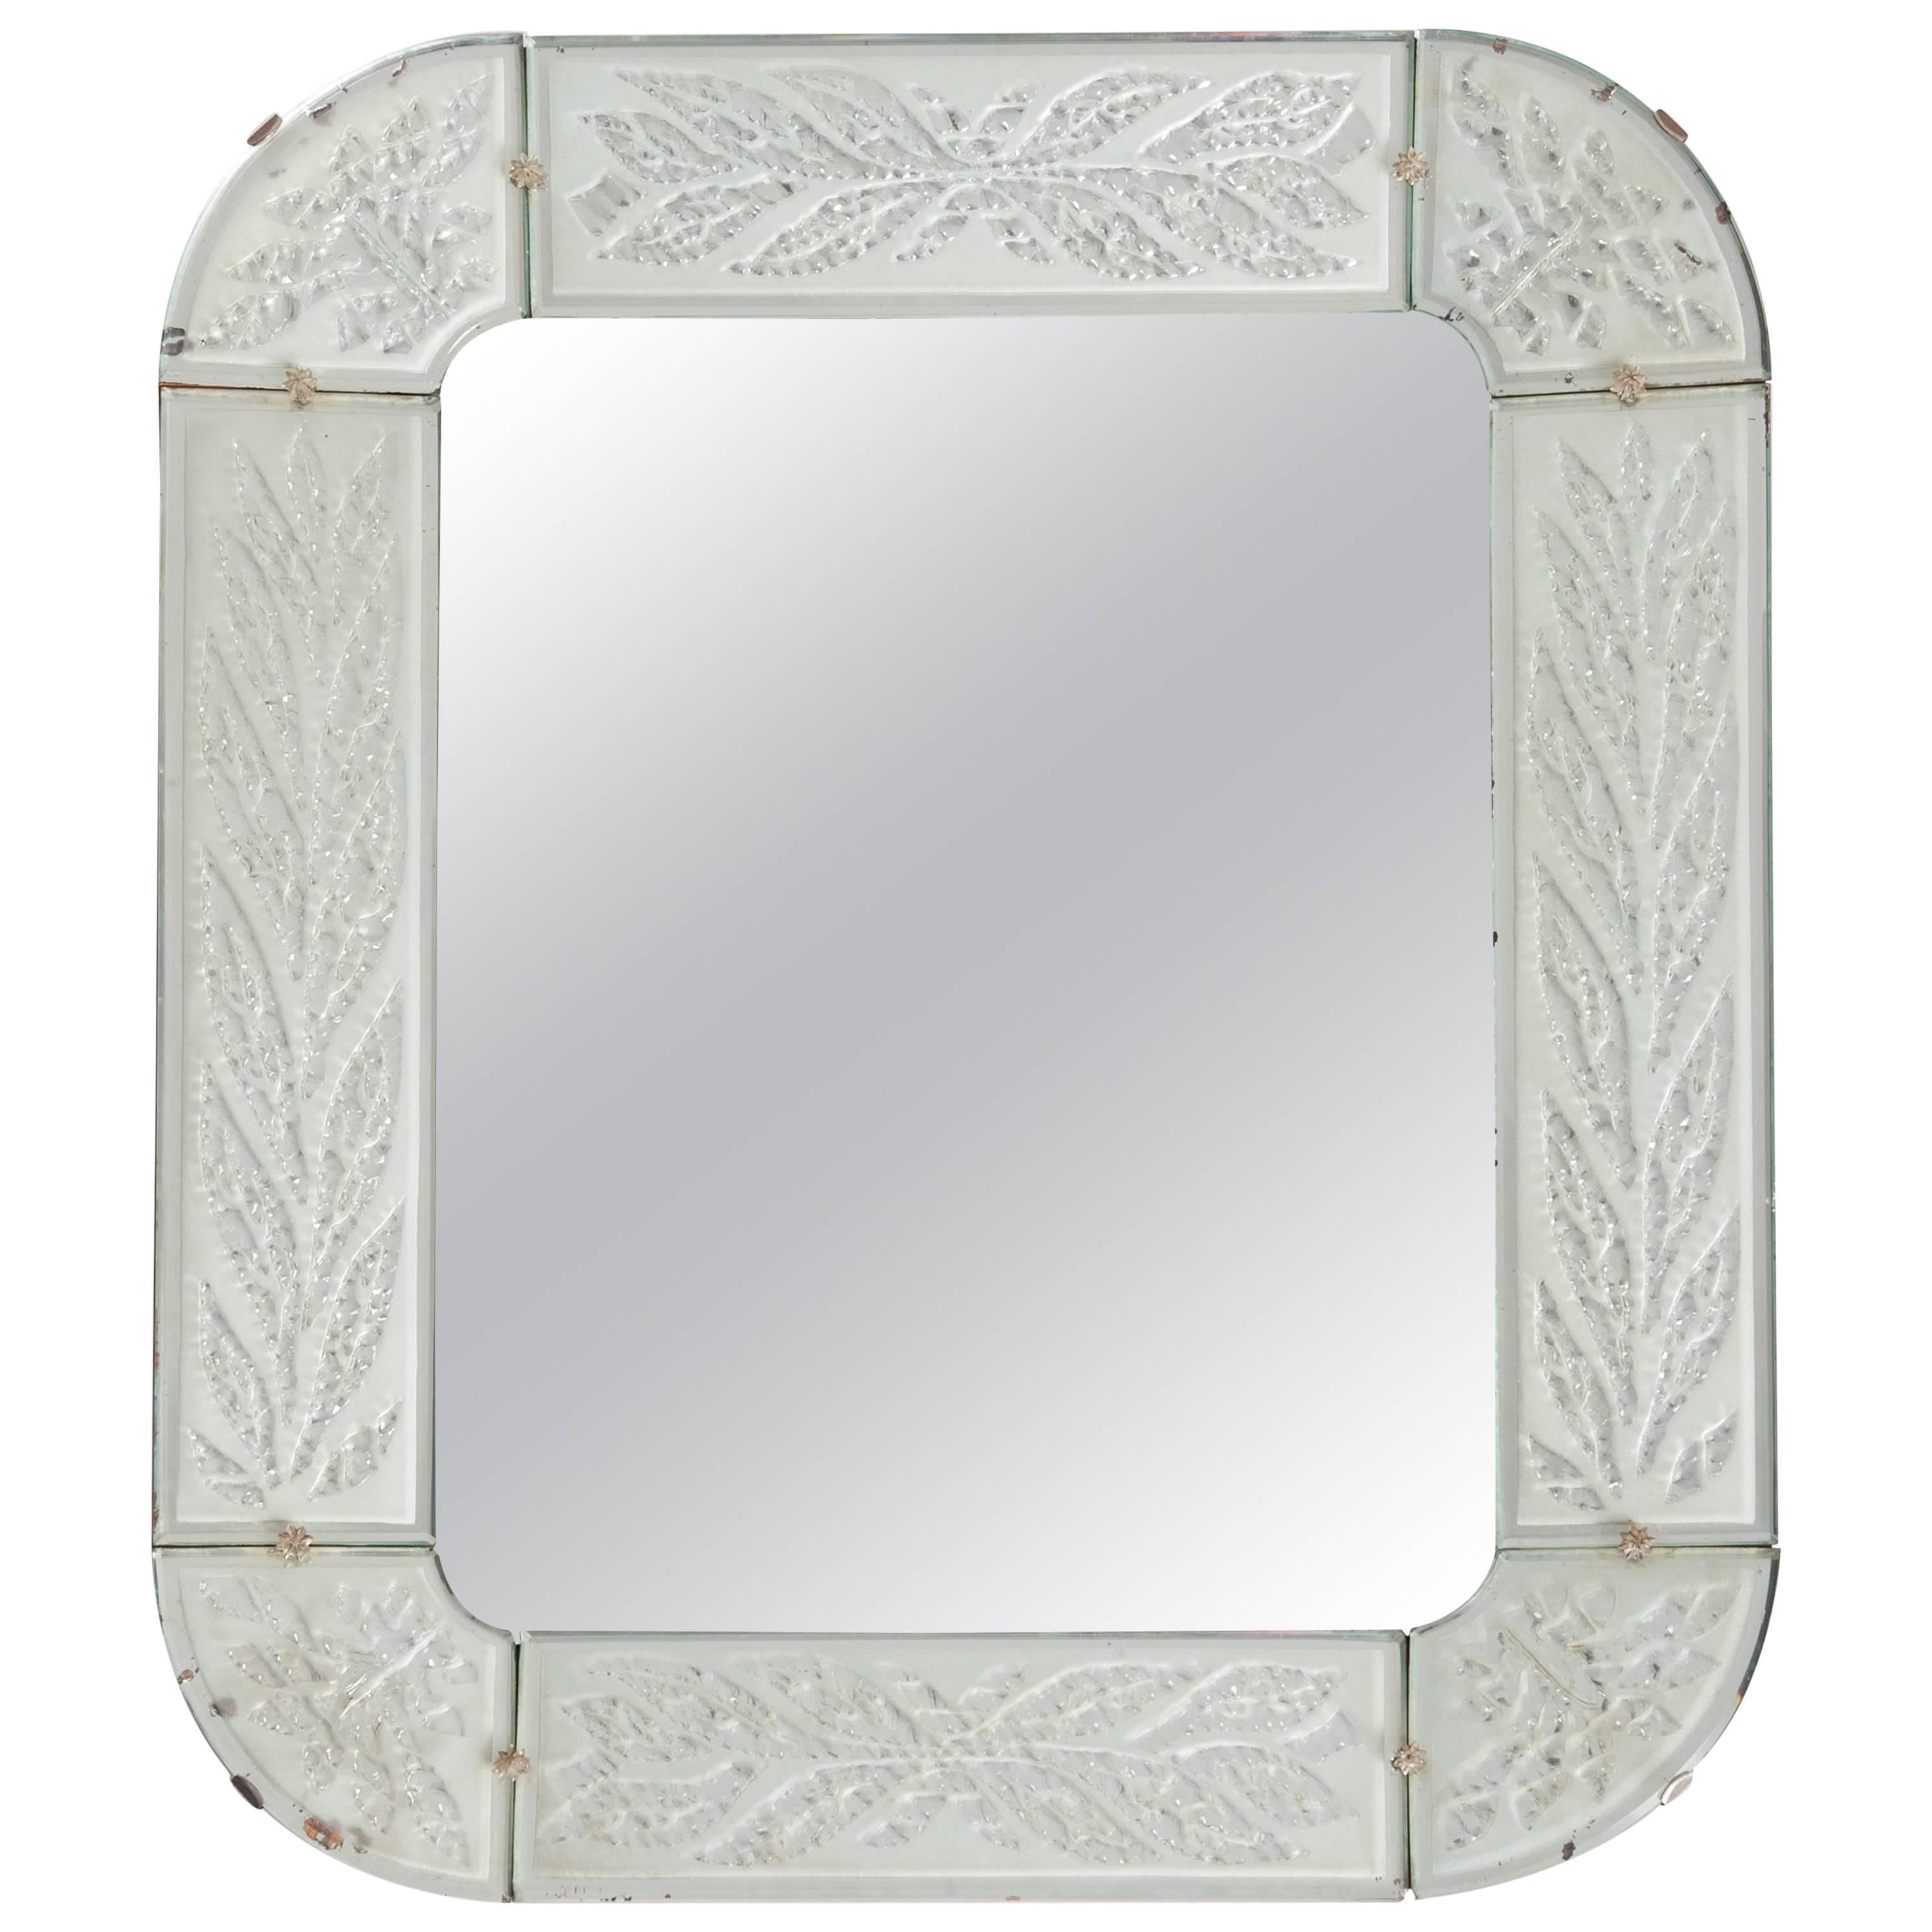 Swedish Art Déco Mirror, Fine Engraving with stylized Leaves 1930s For Sale